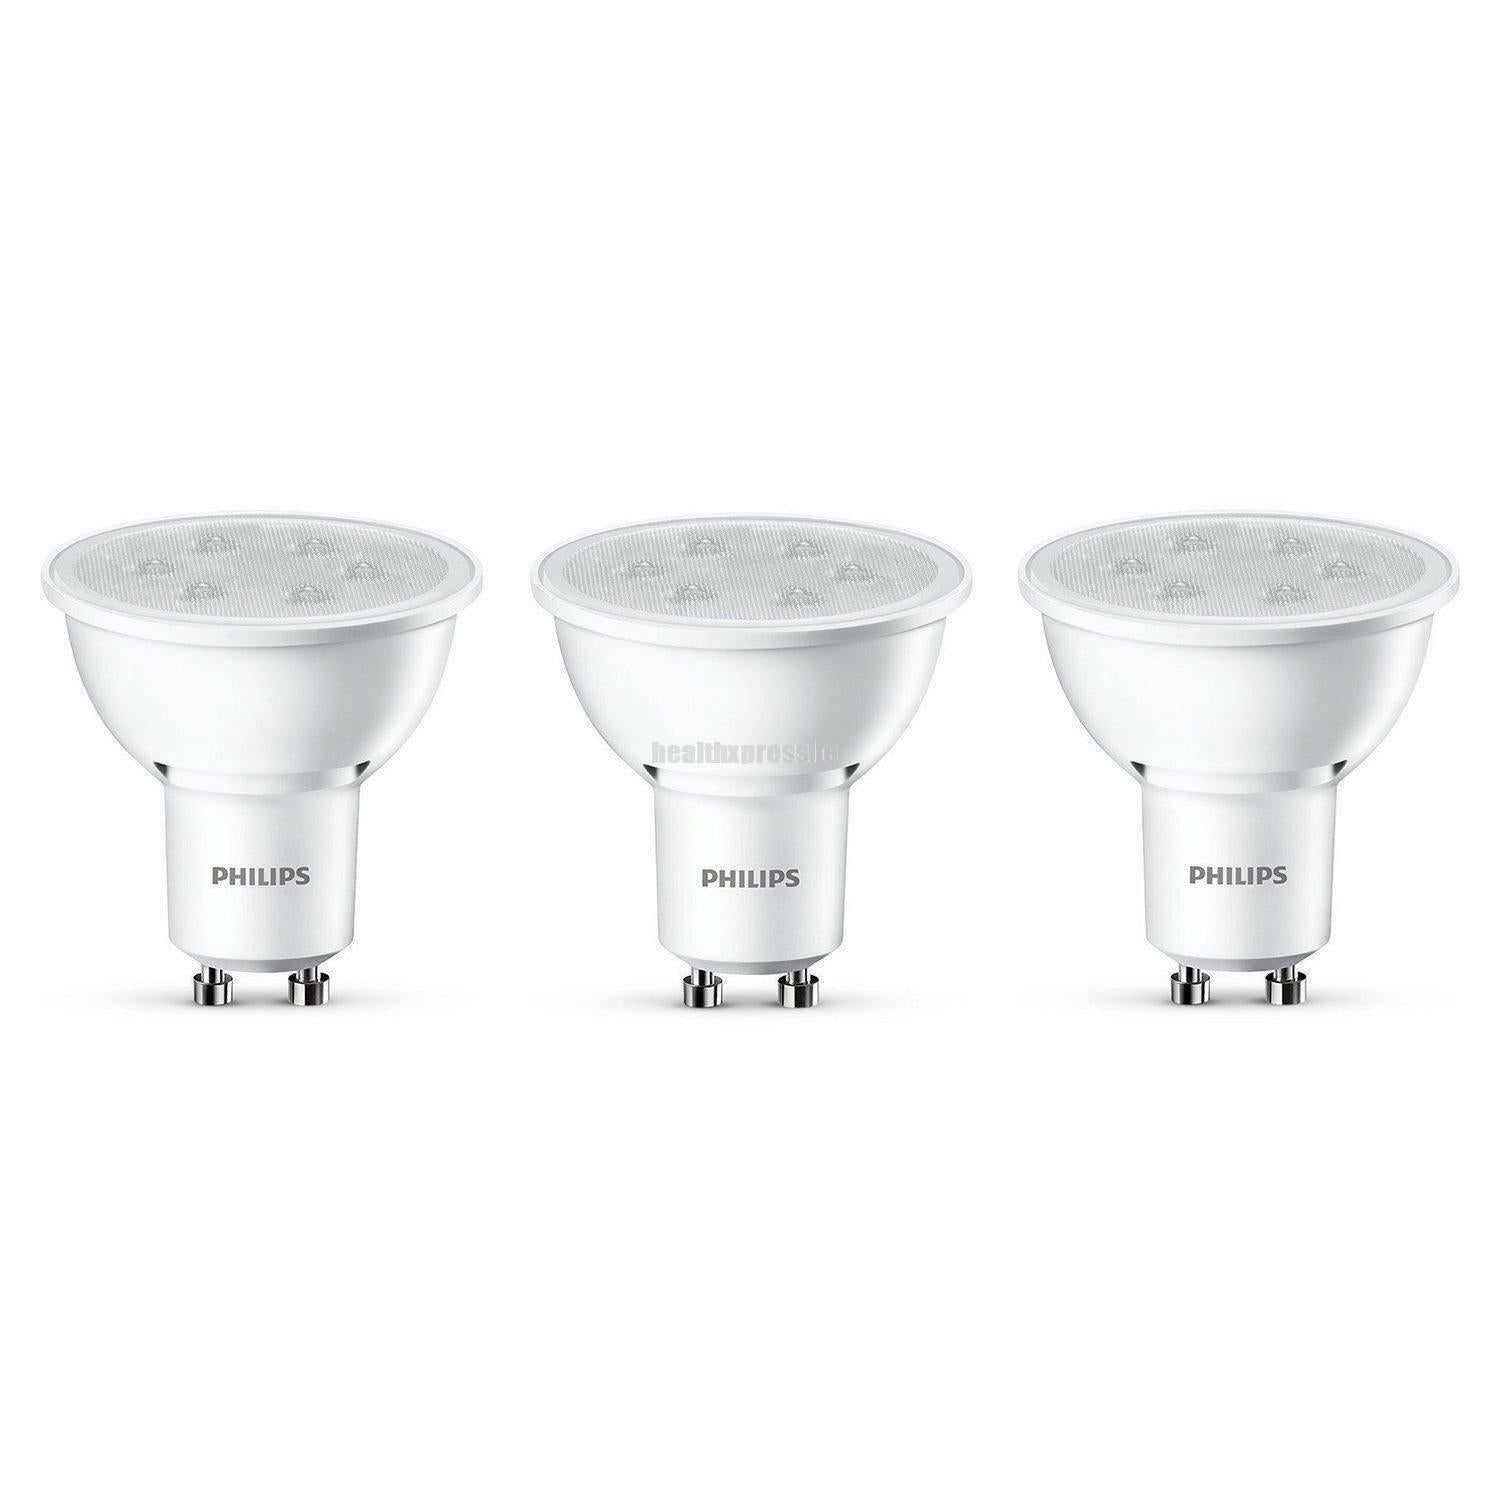 Philips LED Lamp Energy Class A + Warm White 350 Lumen - 50 Watt, Pack of 3 - Healthxpress.ie